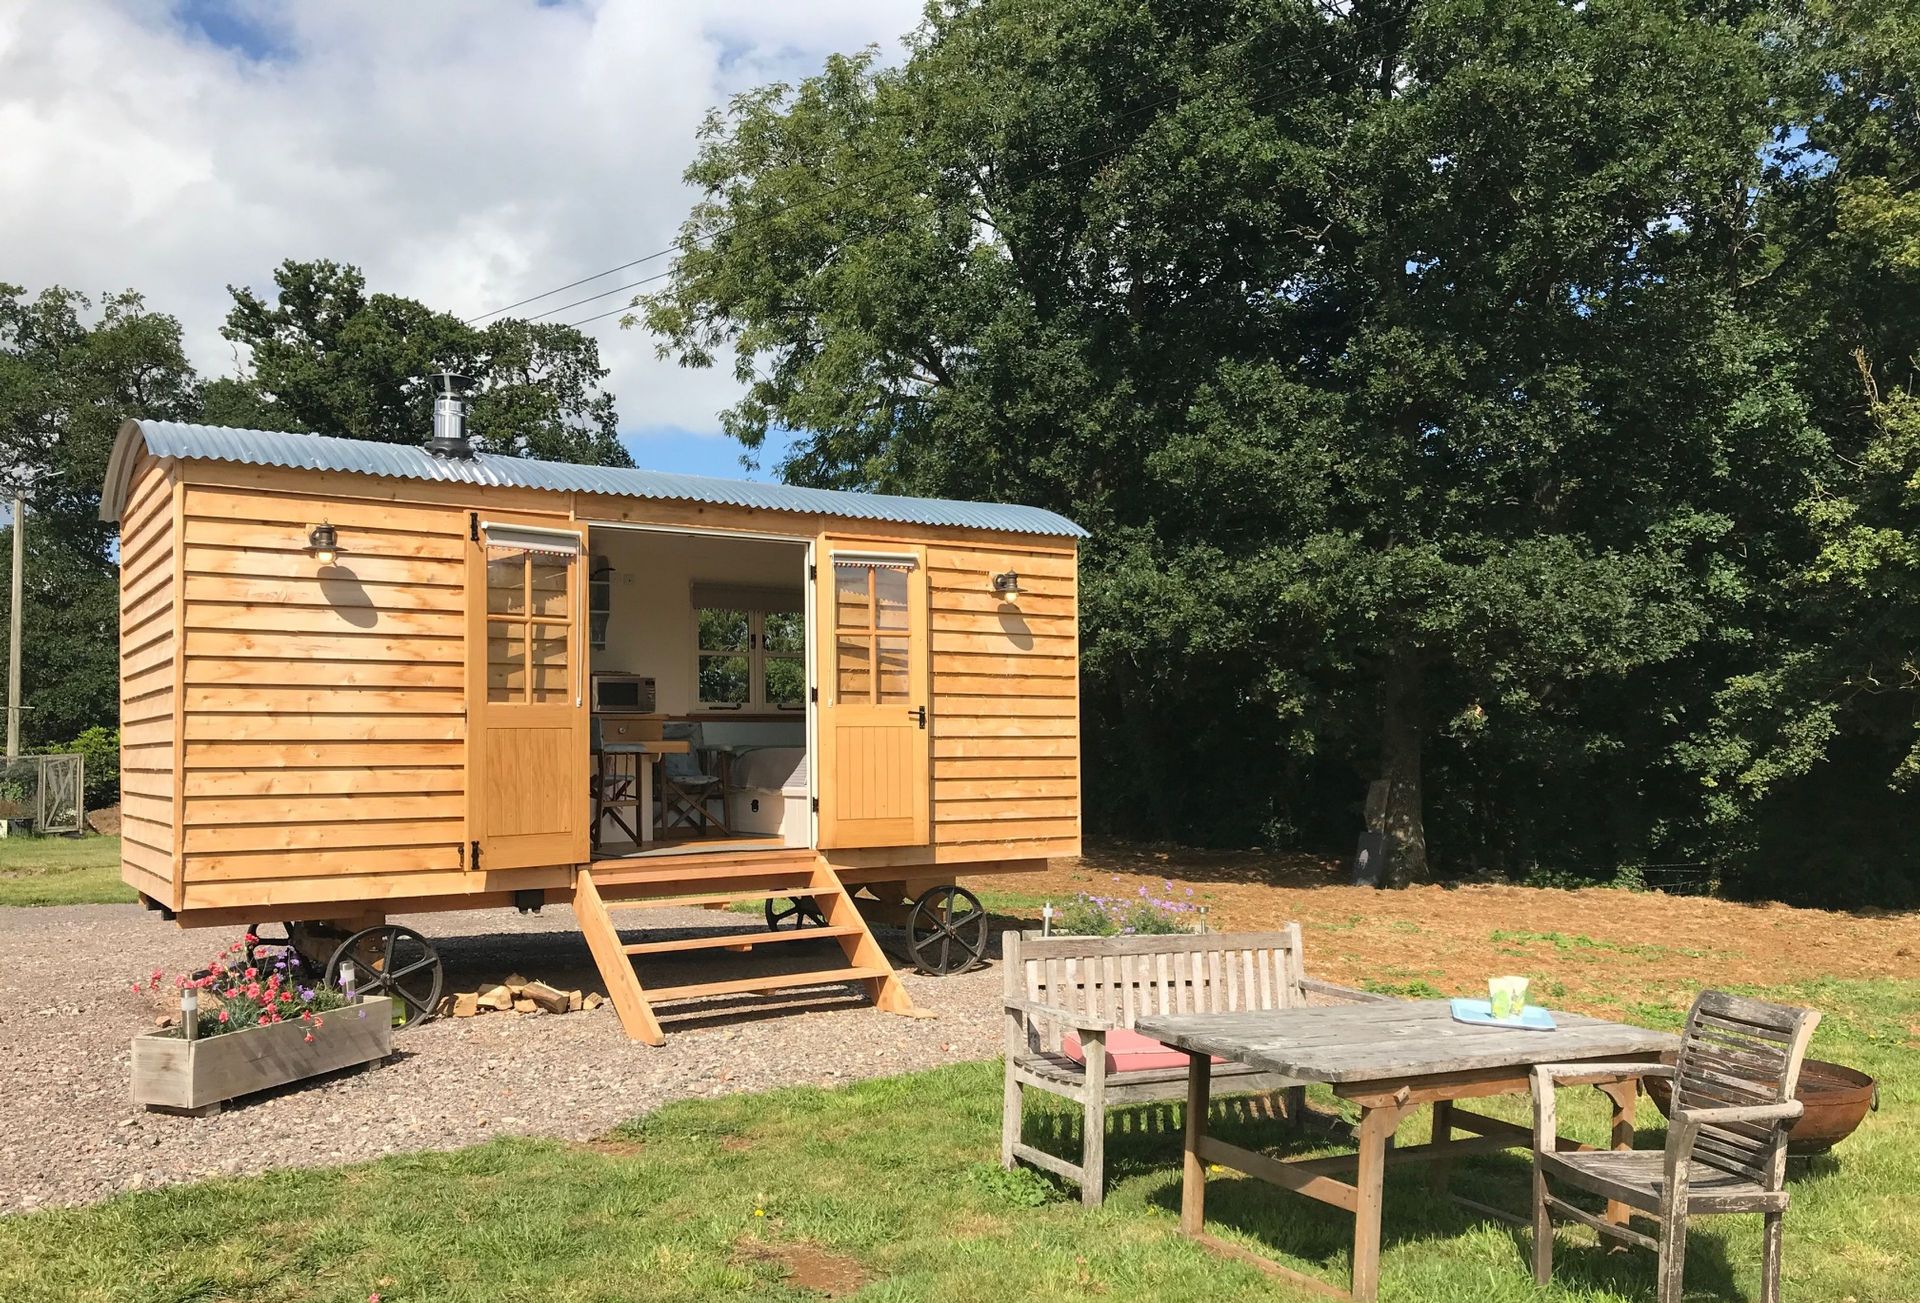 Details about a cottage Holiday at Blossom the shepherd's hut